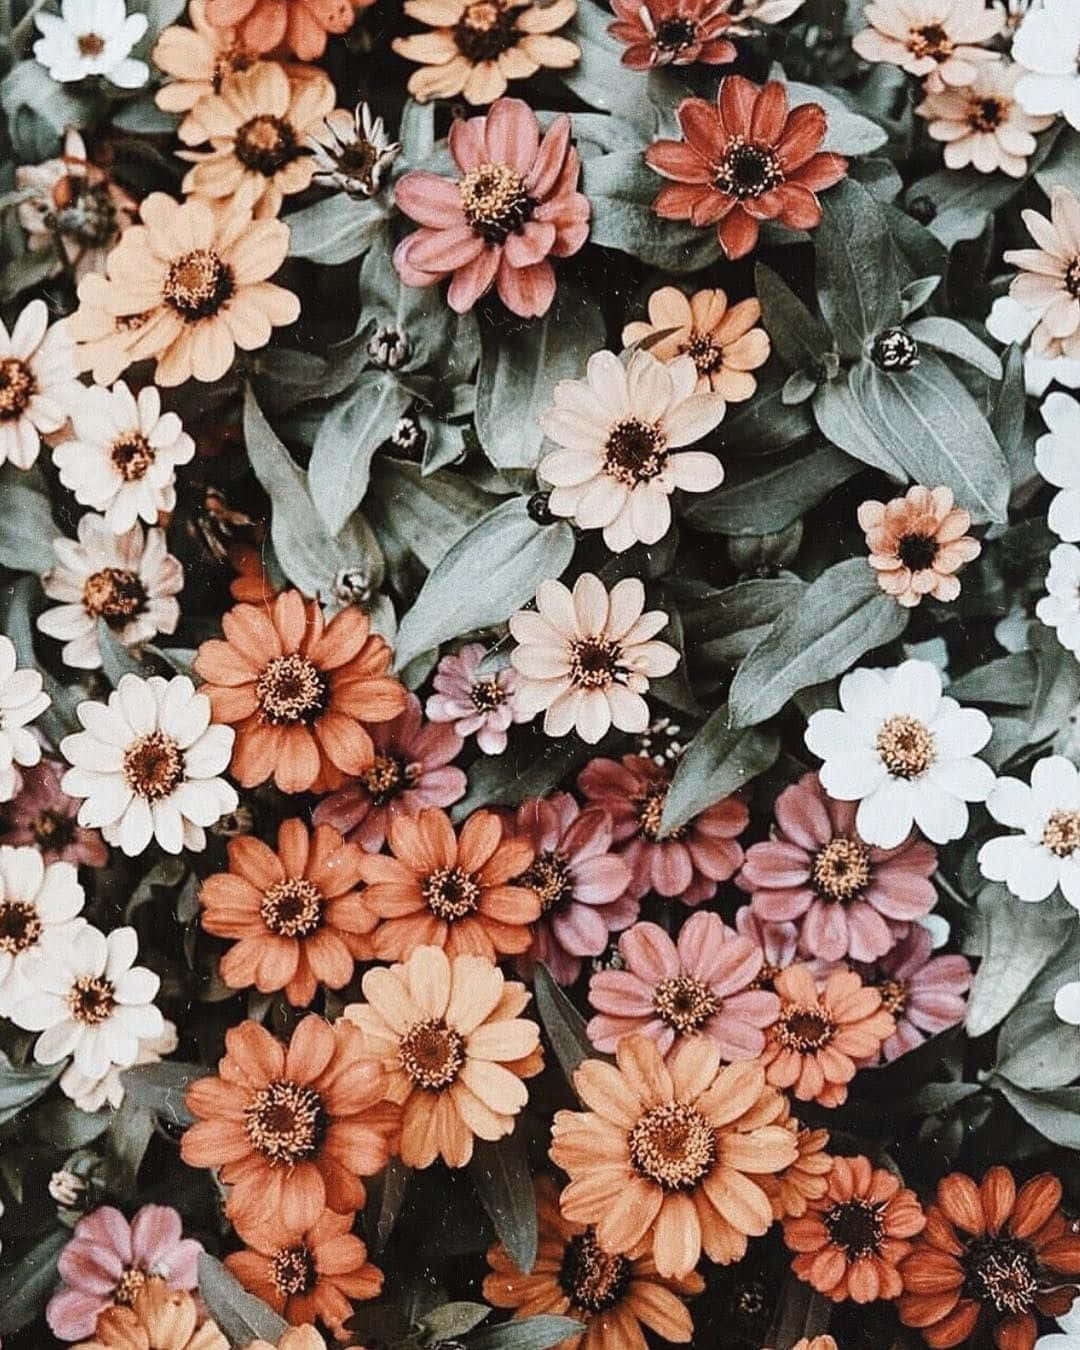 Aesthetic Floral - An Array of Colorful Blooms Wallpaper